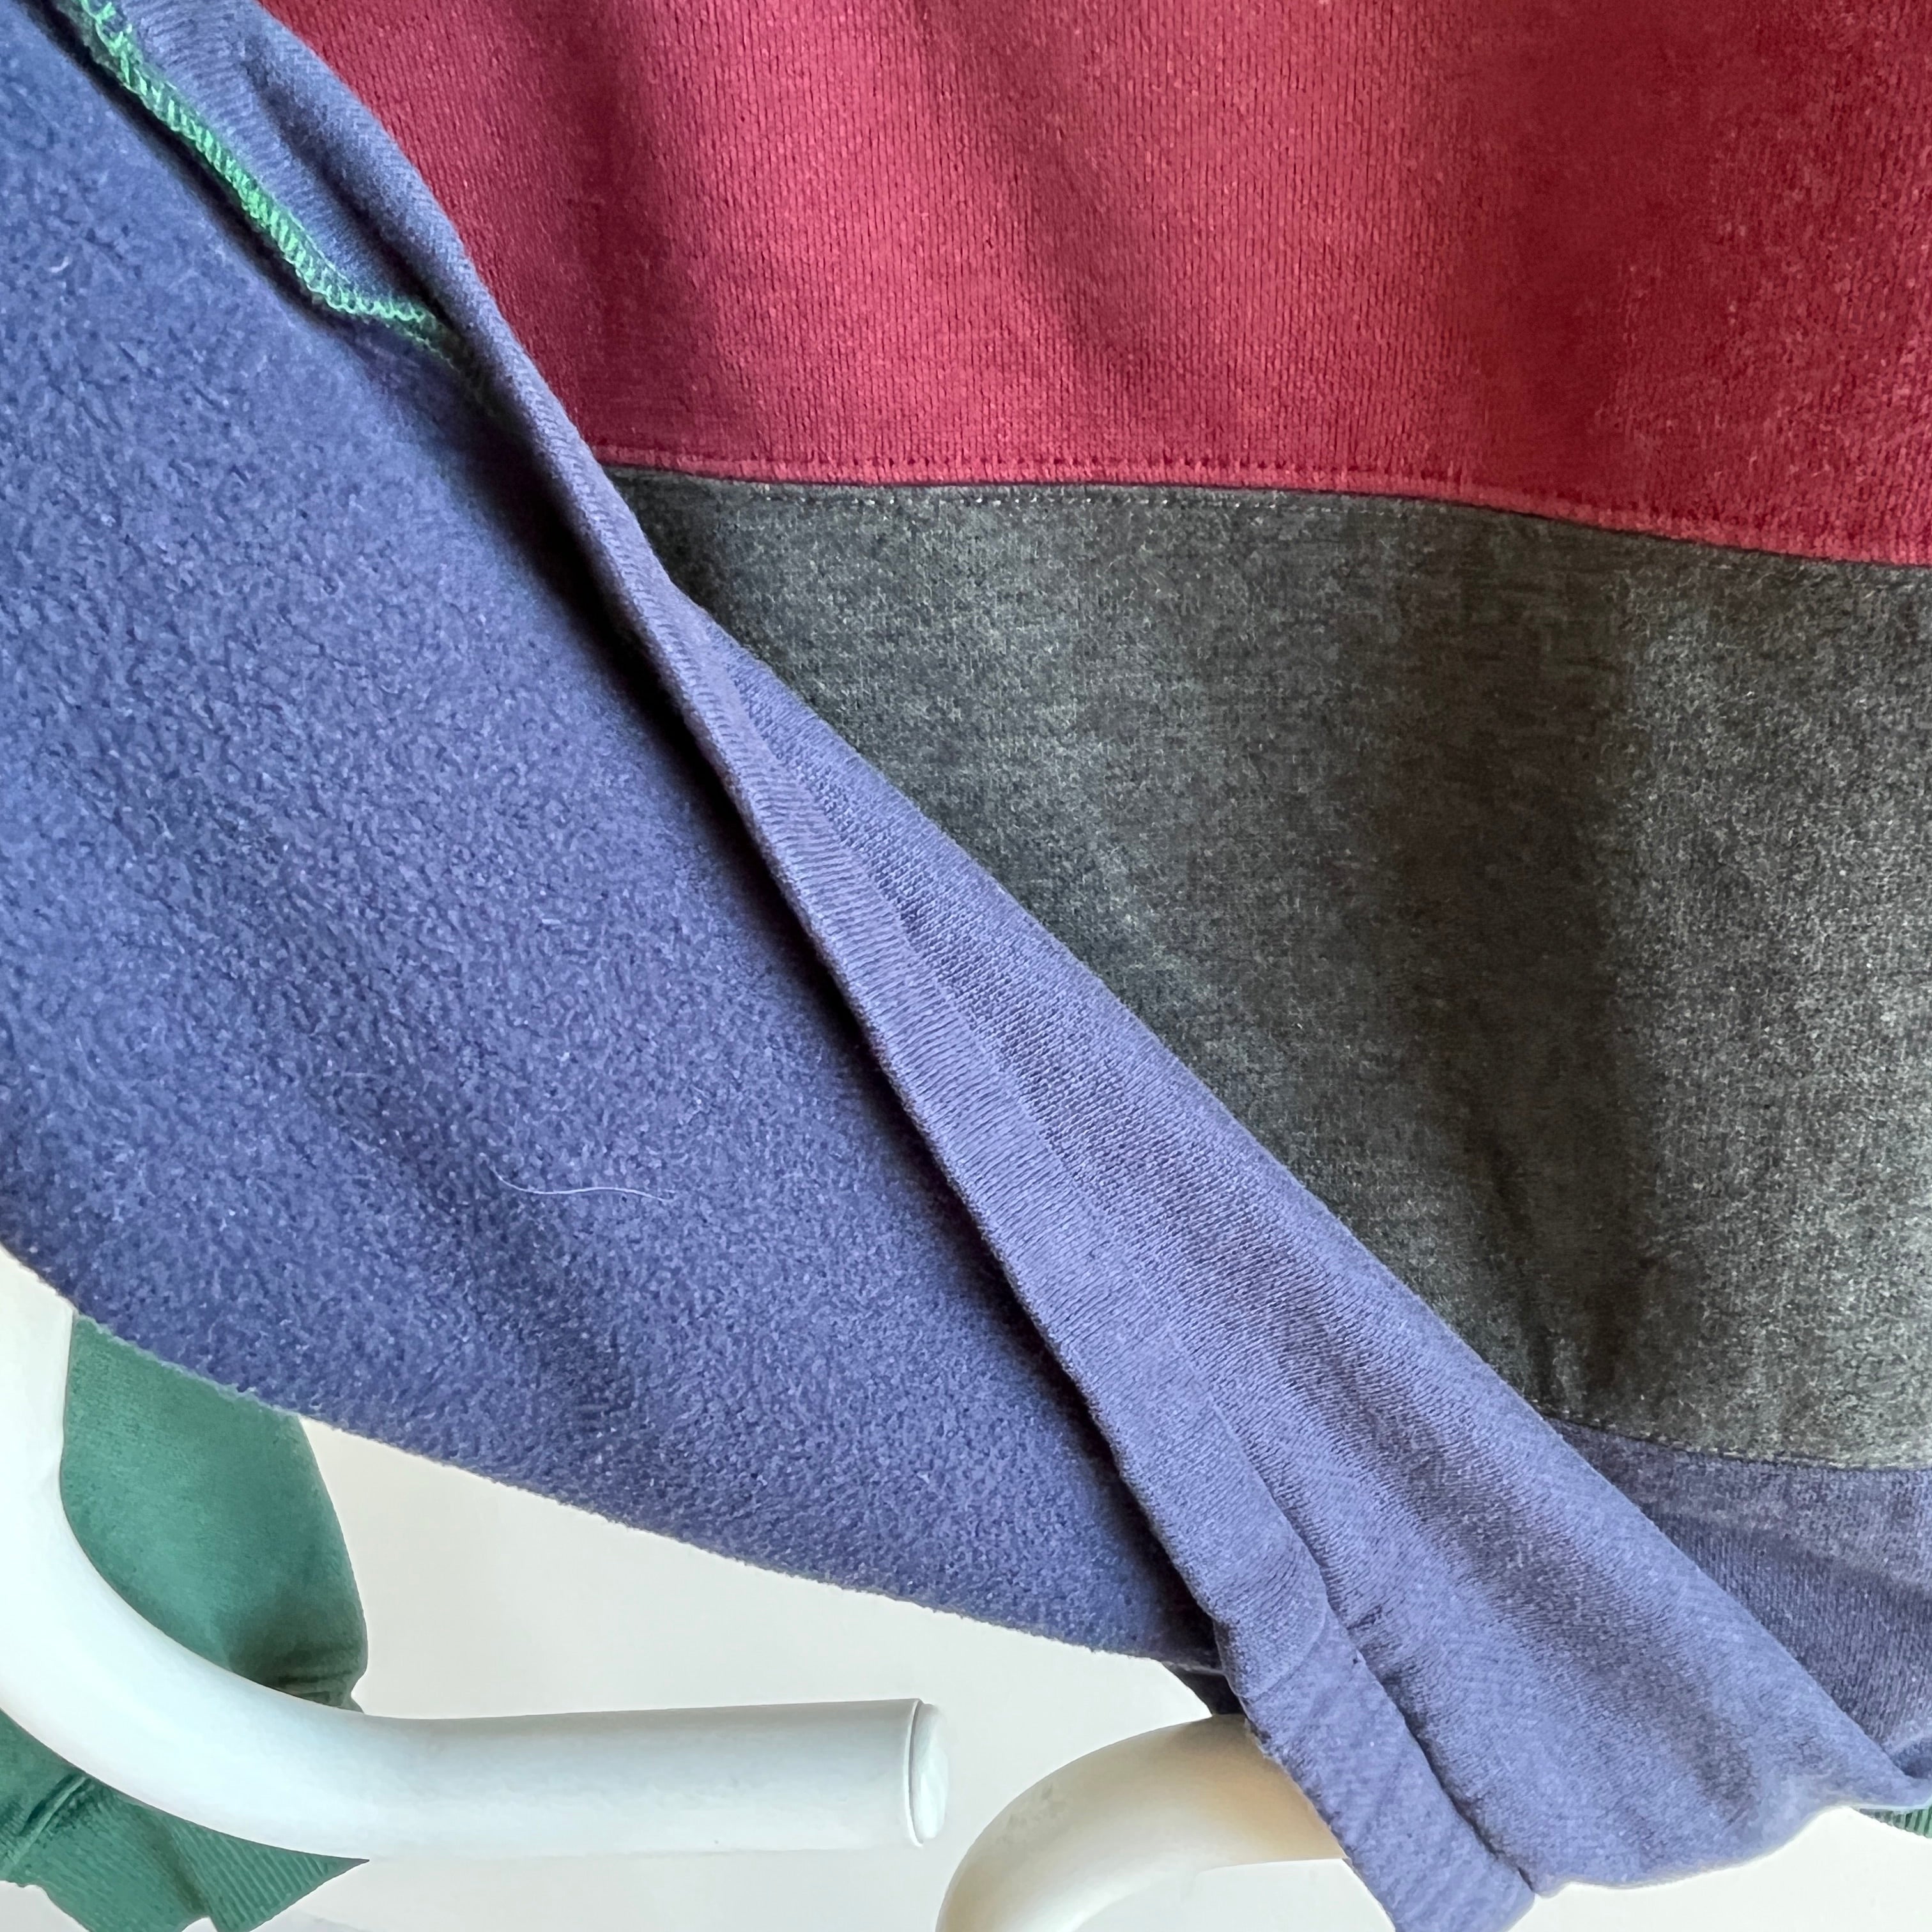 1990s Color Block Cotton Rugby-esque Hoodie with Pockets